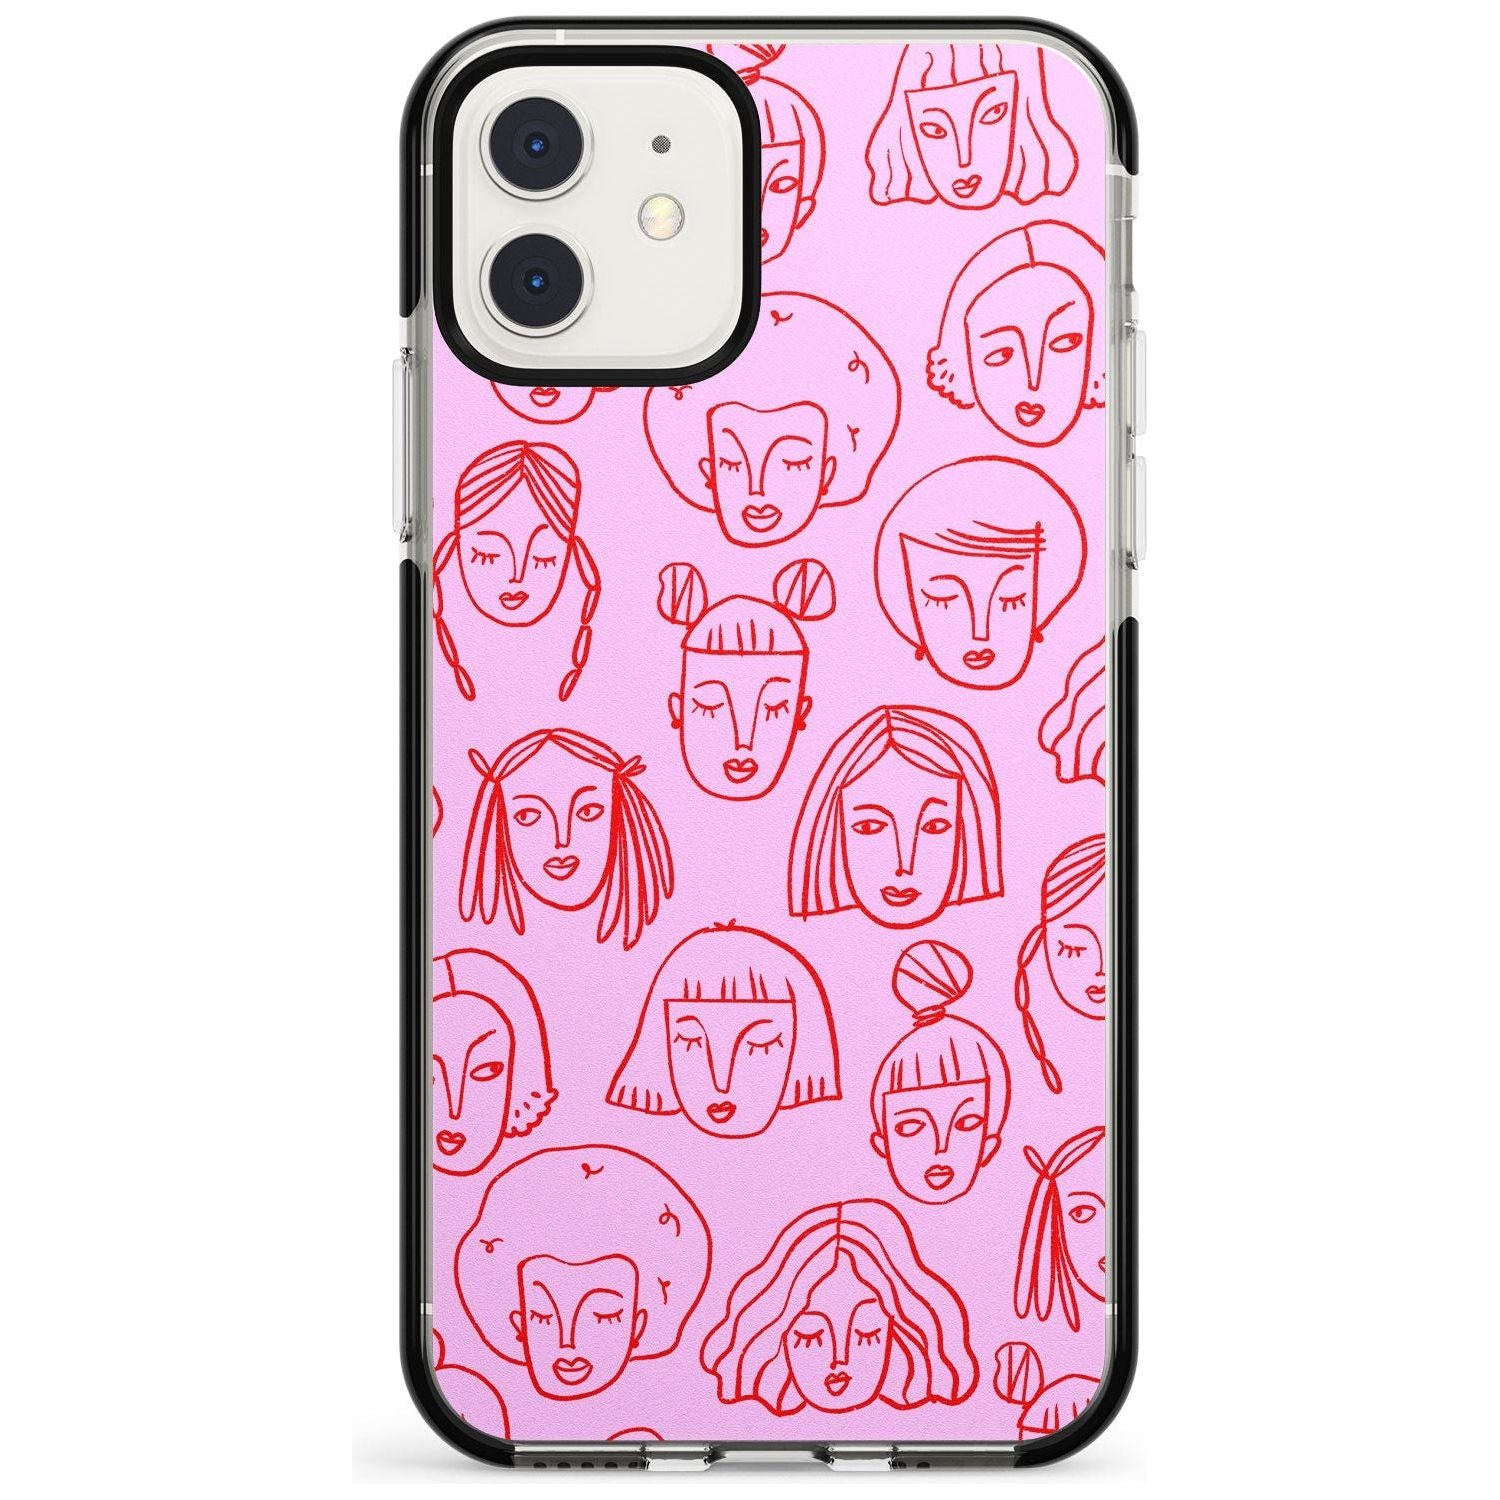 Girl Portrait Doodles in Pink & Red Black Impact Phone Case for iPhone 11